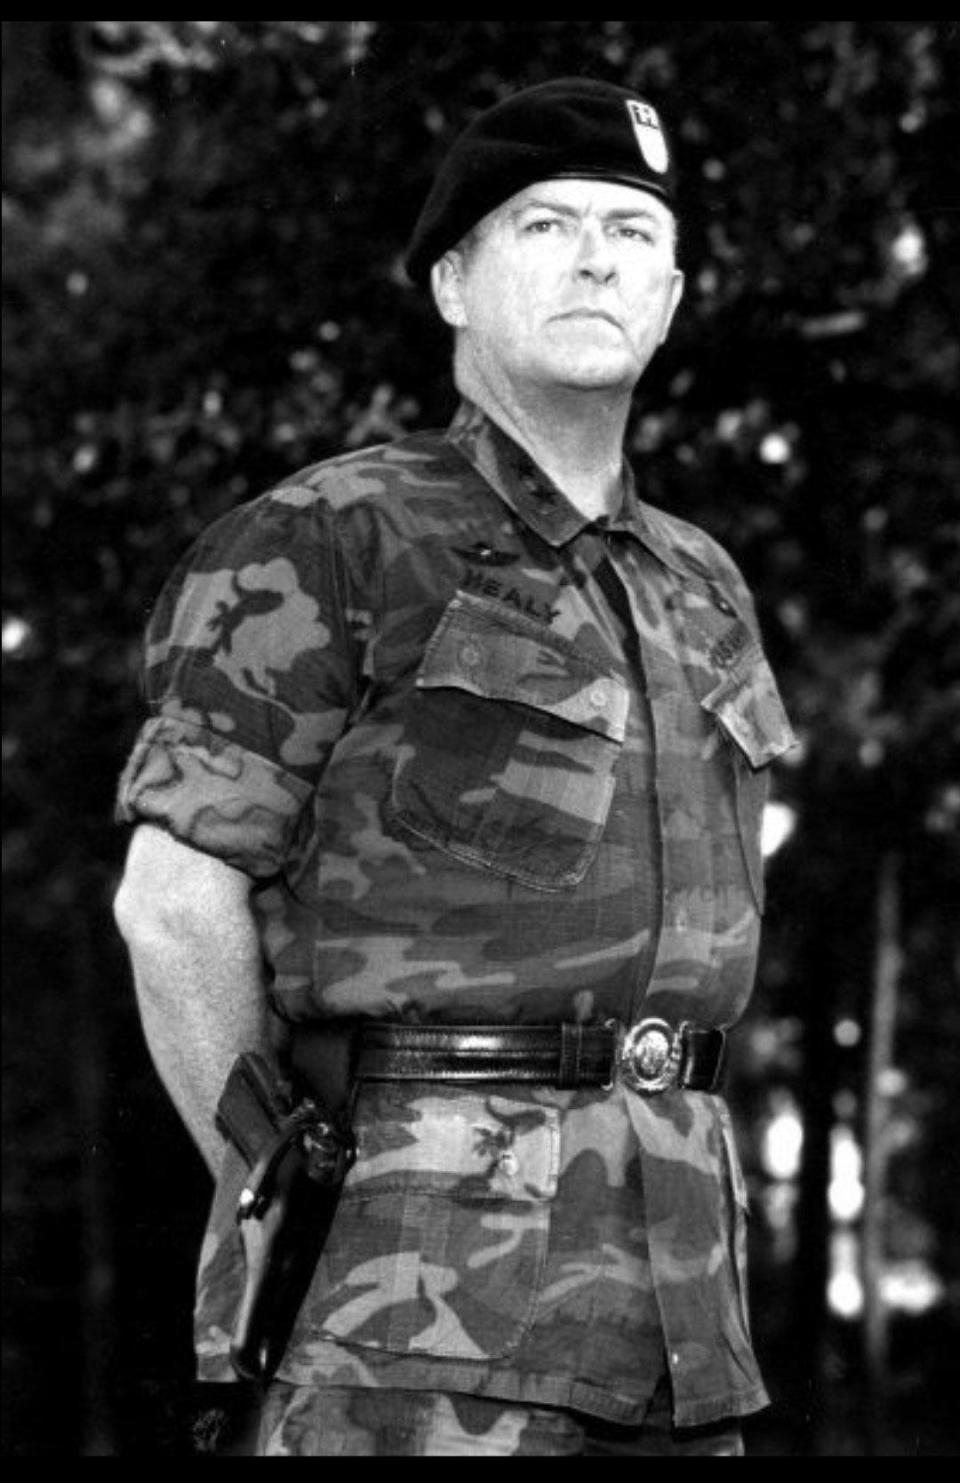 Retired Maj. Gen. Michael D. Healy, pictured during the Vietnam era, was recognized in 2015 by the commanding general of the Army's John F. Kennedy Special Warfare Center and School with the Distinguished Member of the Special Forces Regiment award. Healy, who inspired the character portrayed by John Wayne in the movie "The Green Berets," retired in Jacksonville.